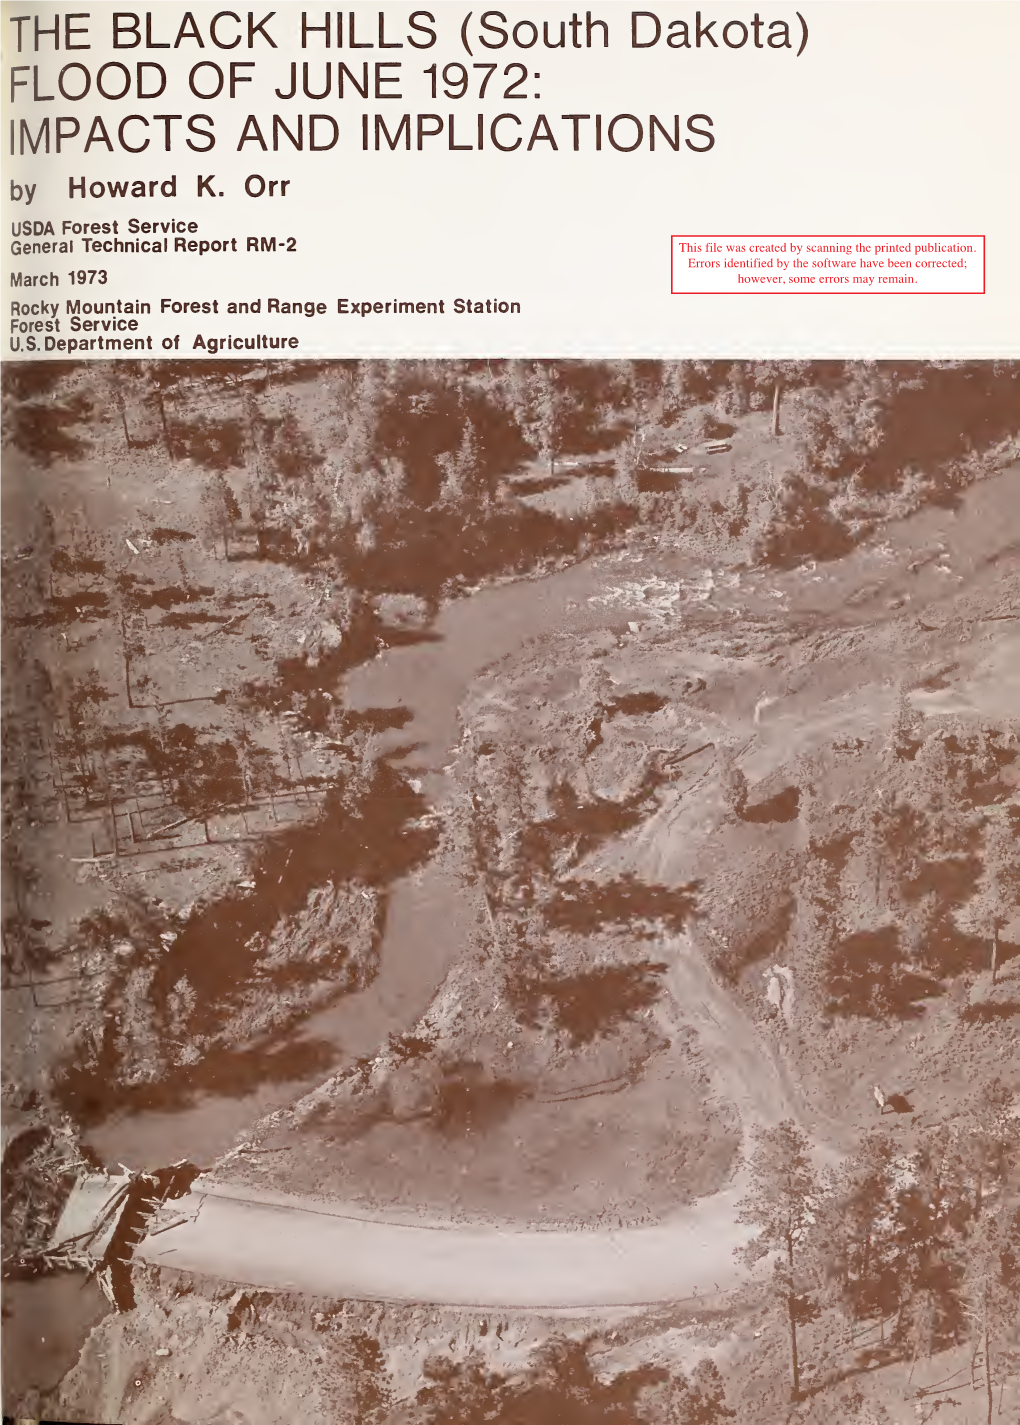 THE BLACK HILLS (South Dakota) FLOOD of JUNE 1972: IMPACTS and IMPLICATIONS by Howard K